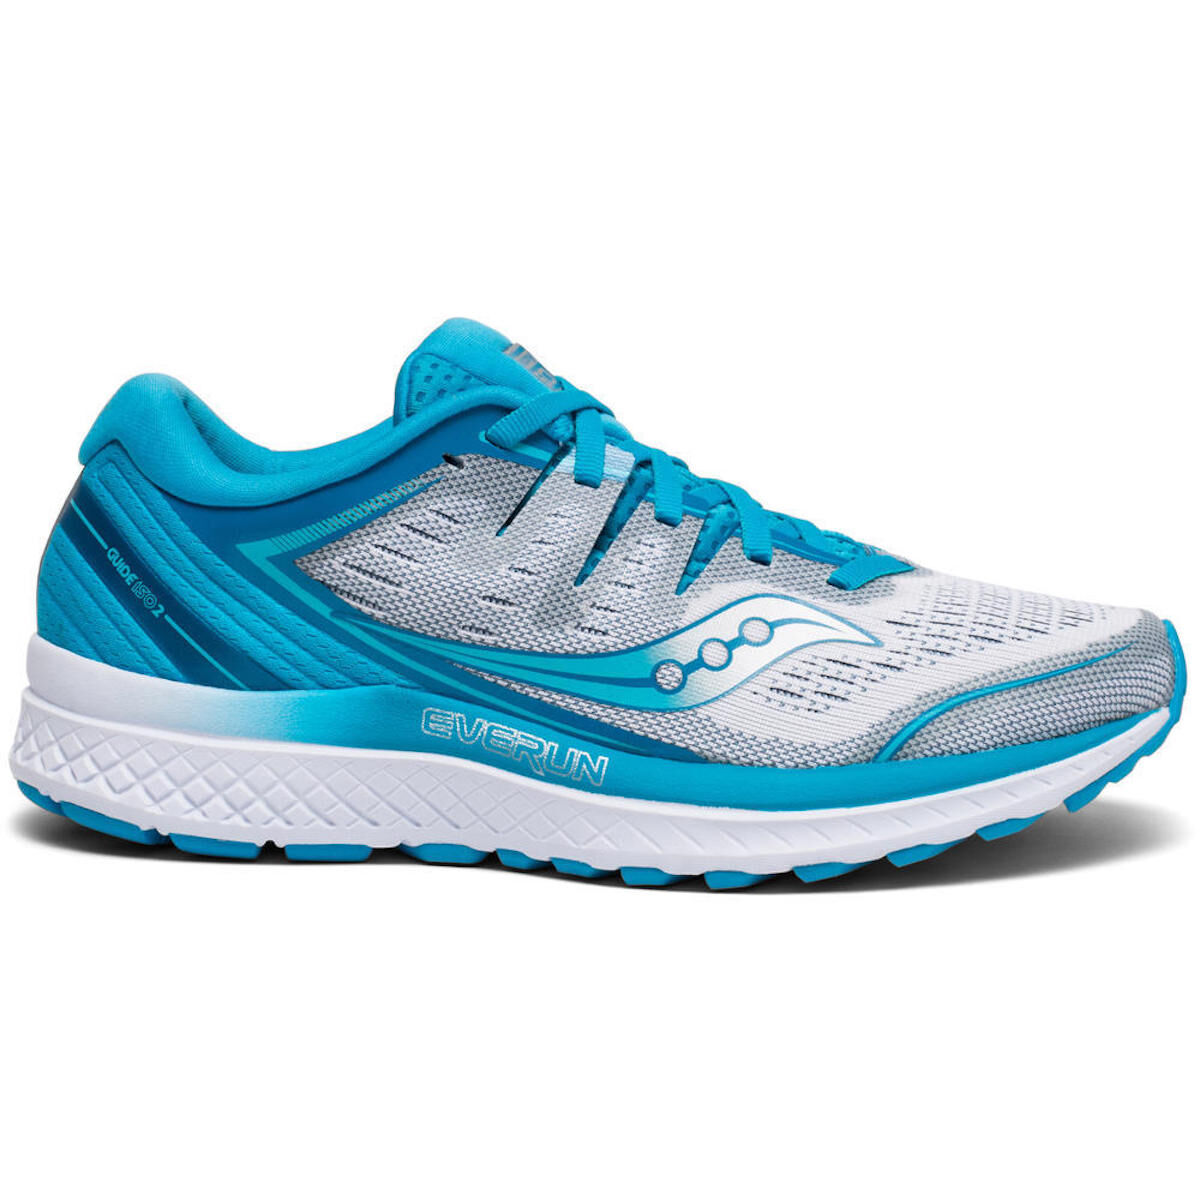 Saucony - Guide Iso 2 - Running shoes - Women's